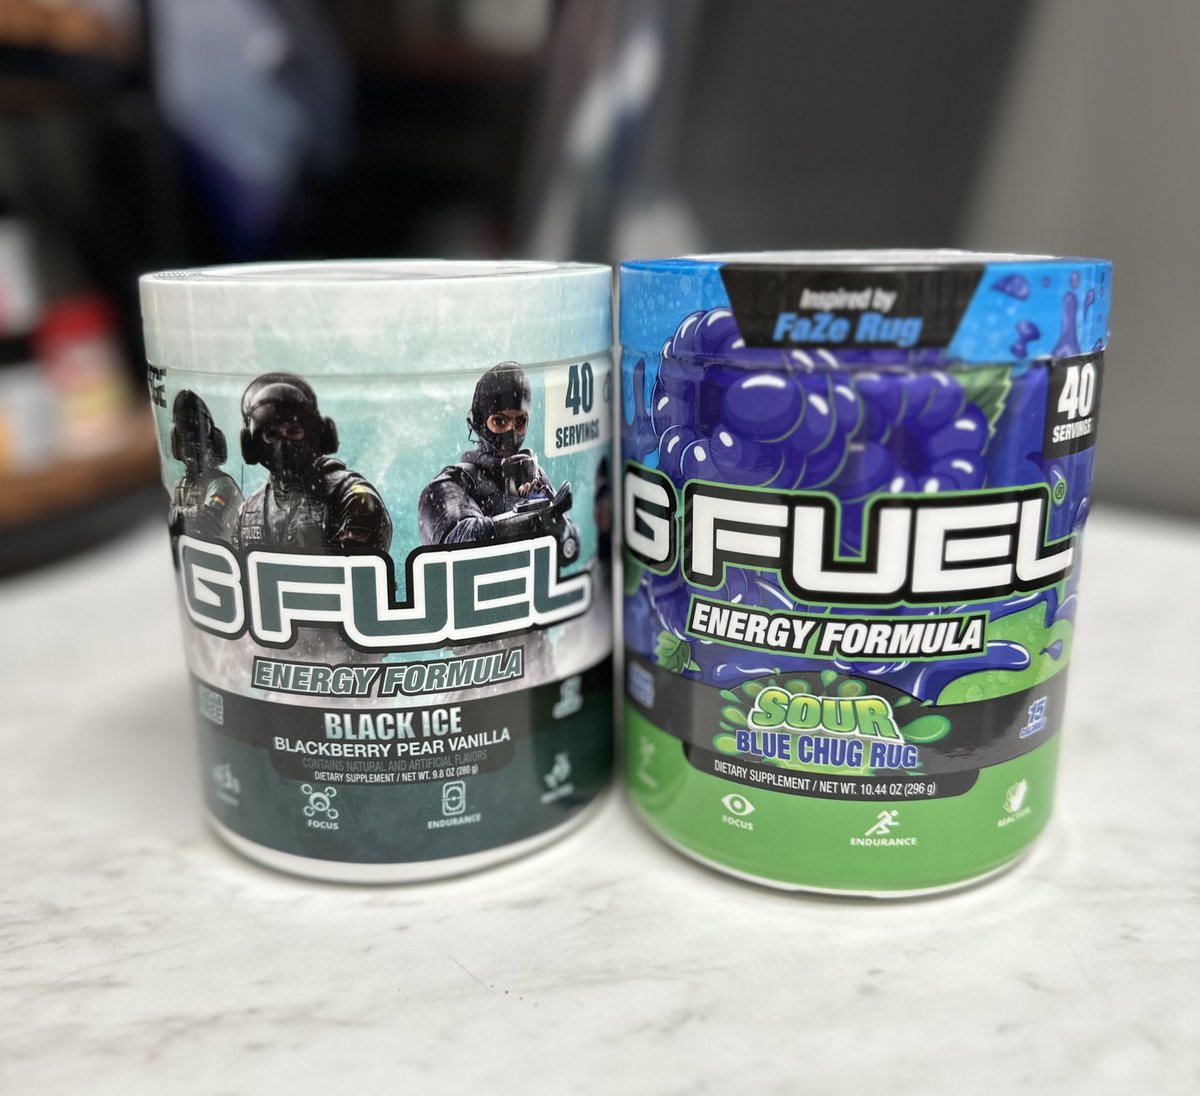 About to find out what these two #GFUEL flavors taste like together! 🤔 @GFuelEnergy